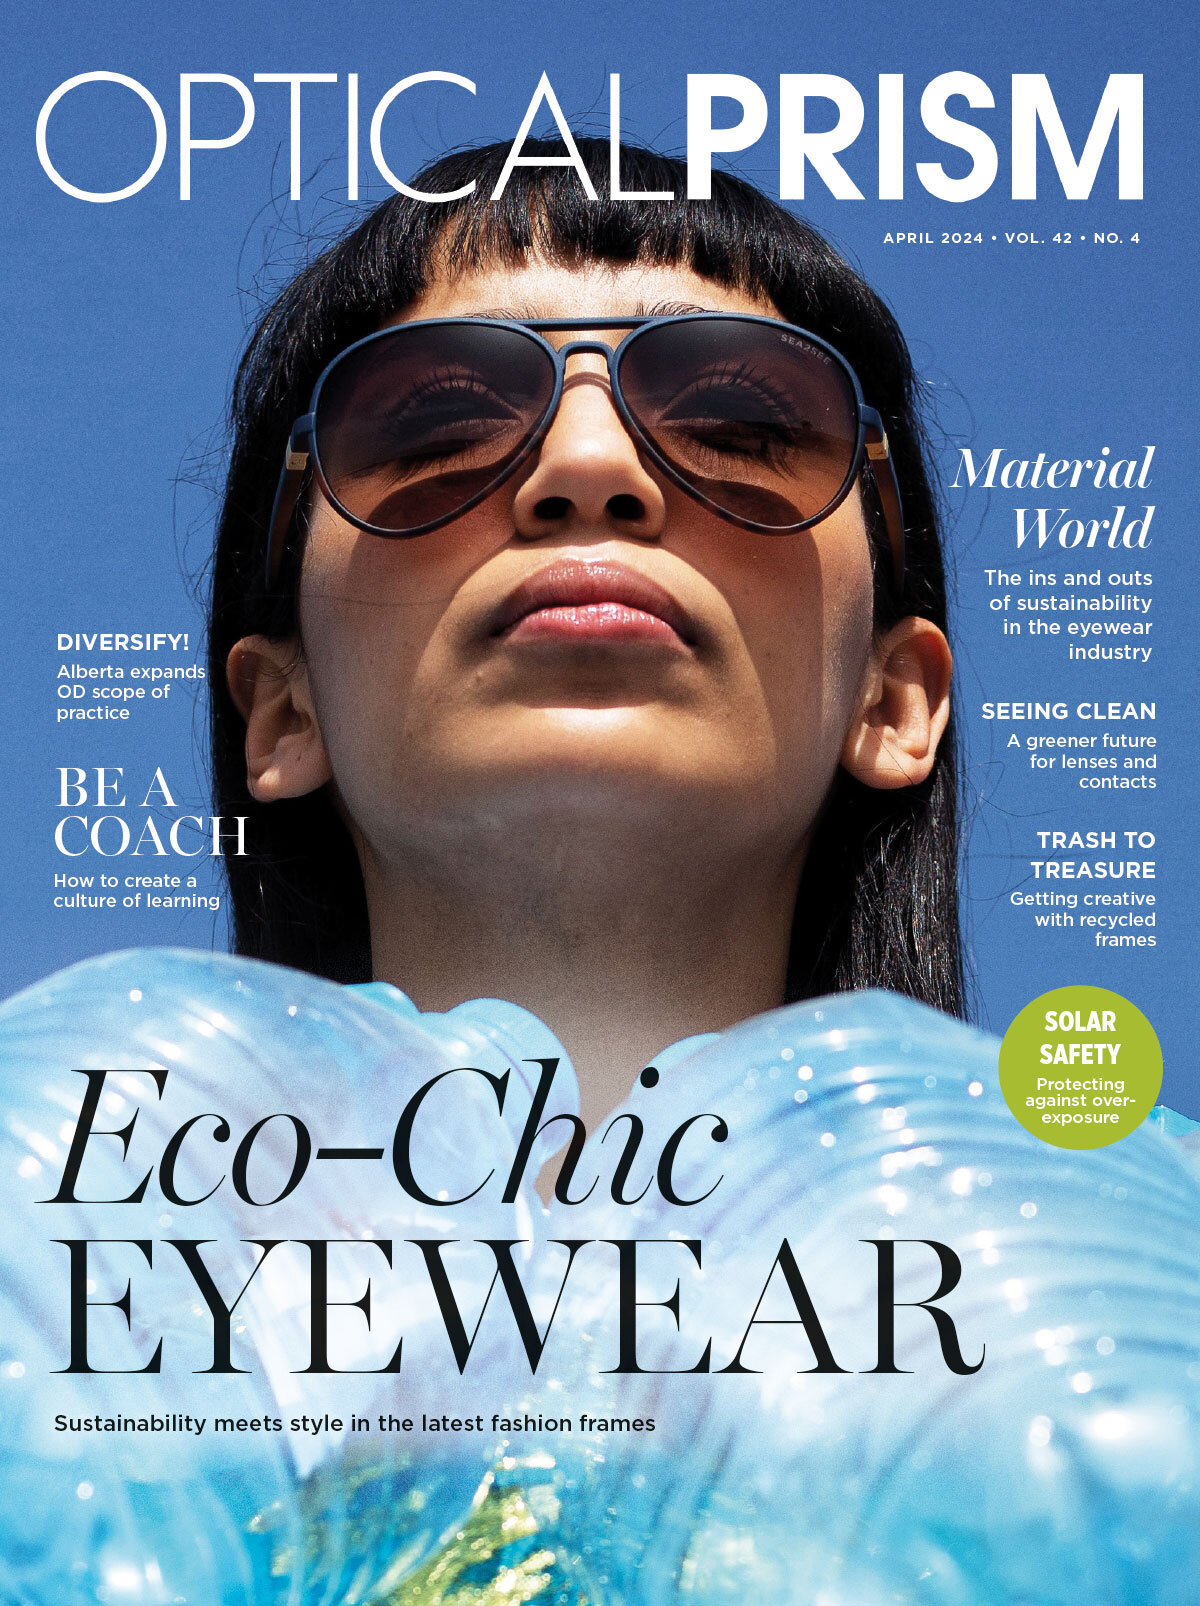 Sports shades for all seasons - Optical Prism Magazine